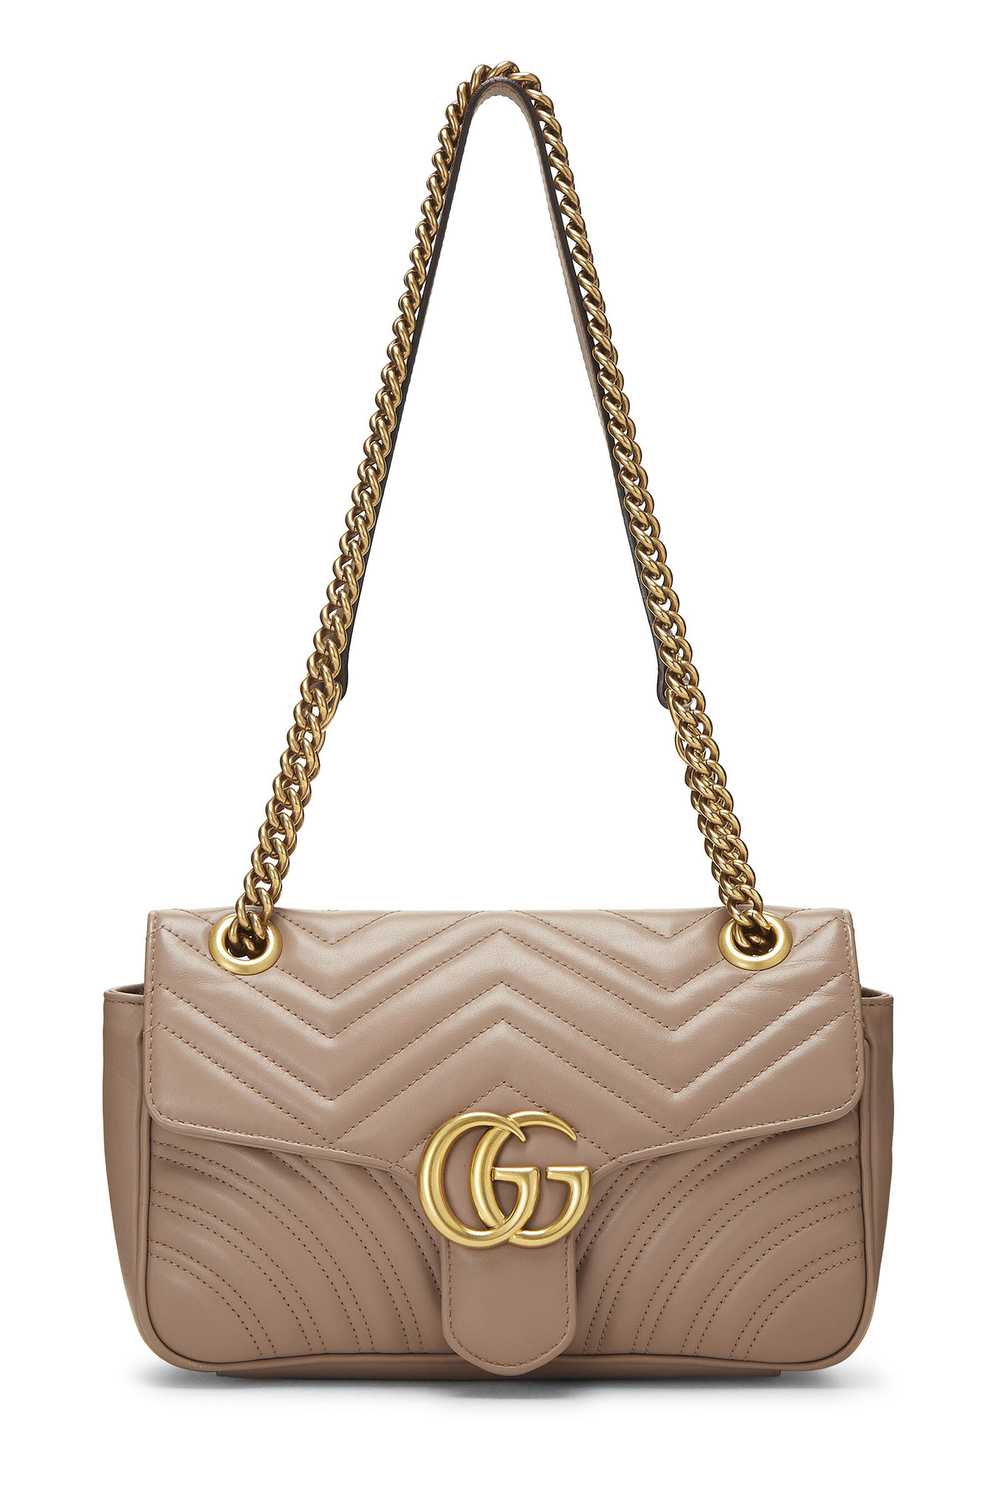 Pink Leather GG Marmont Shoulder Bag Small - image 1